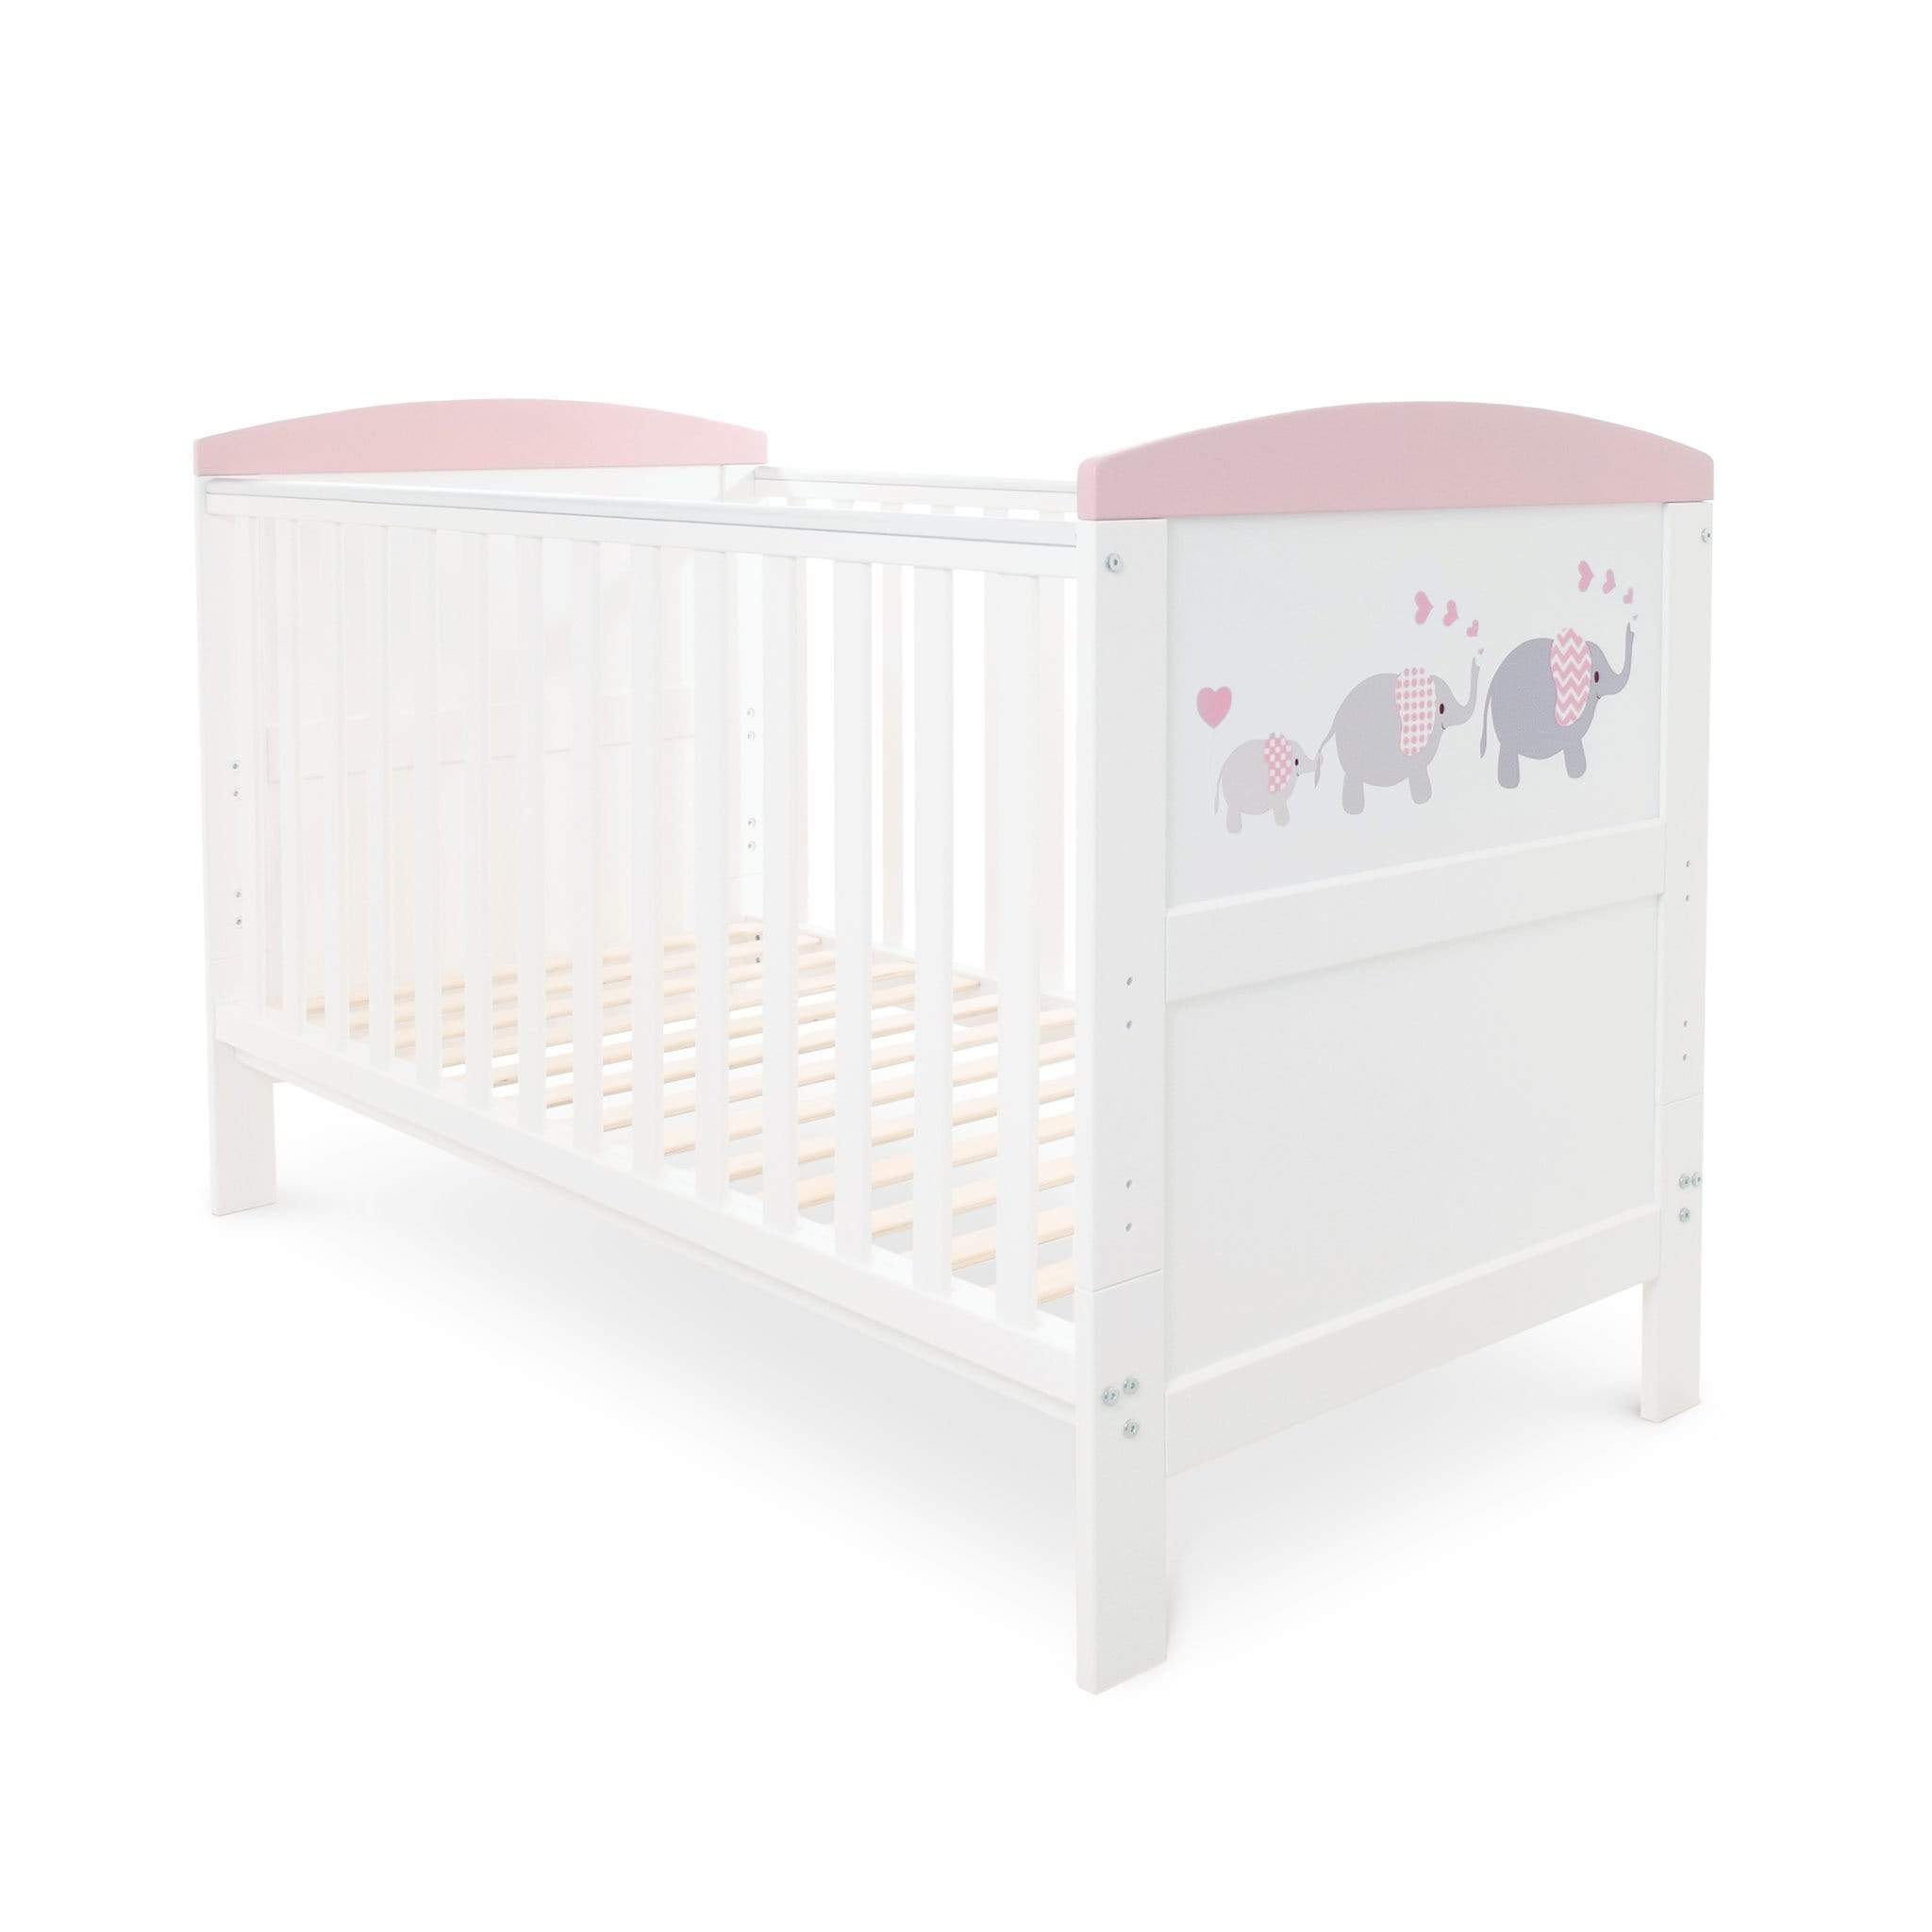 Ickle Bubba Cot Beds Ickle Bubba Coleby Style Cot Bed Elephant Love Pink 44-002-000-823